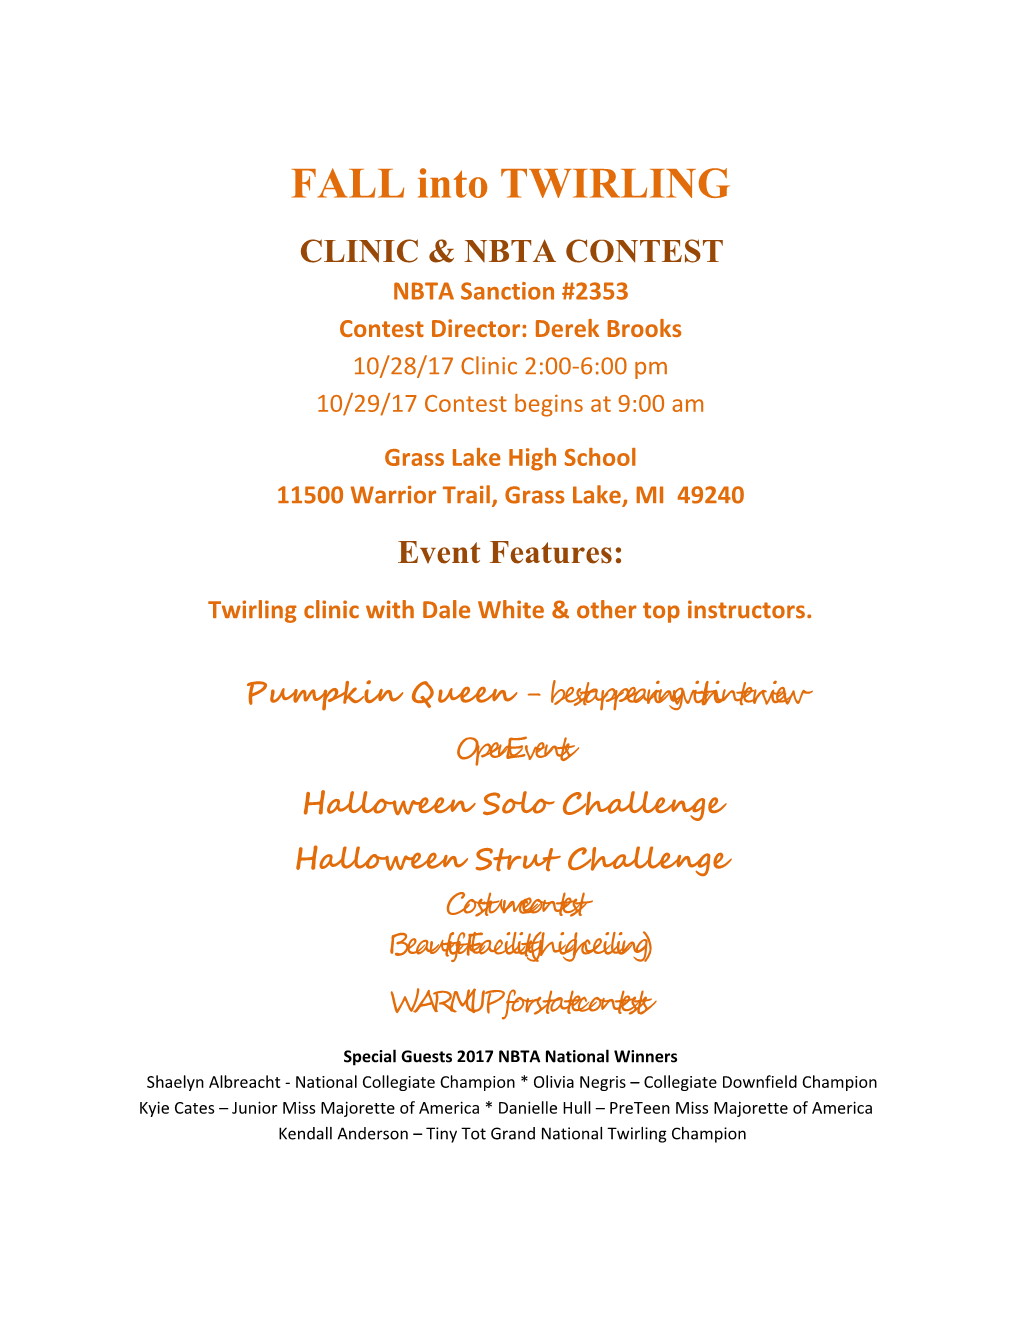 FALL Into TWIRLING